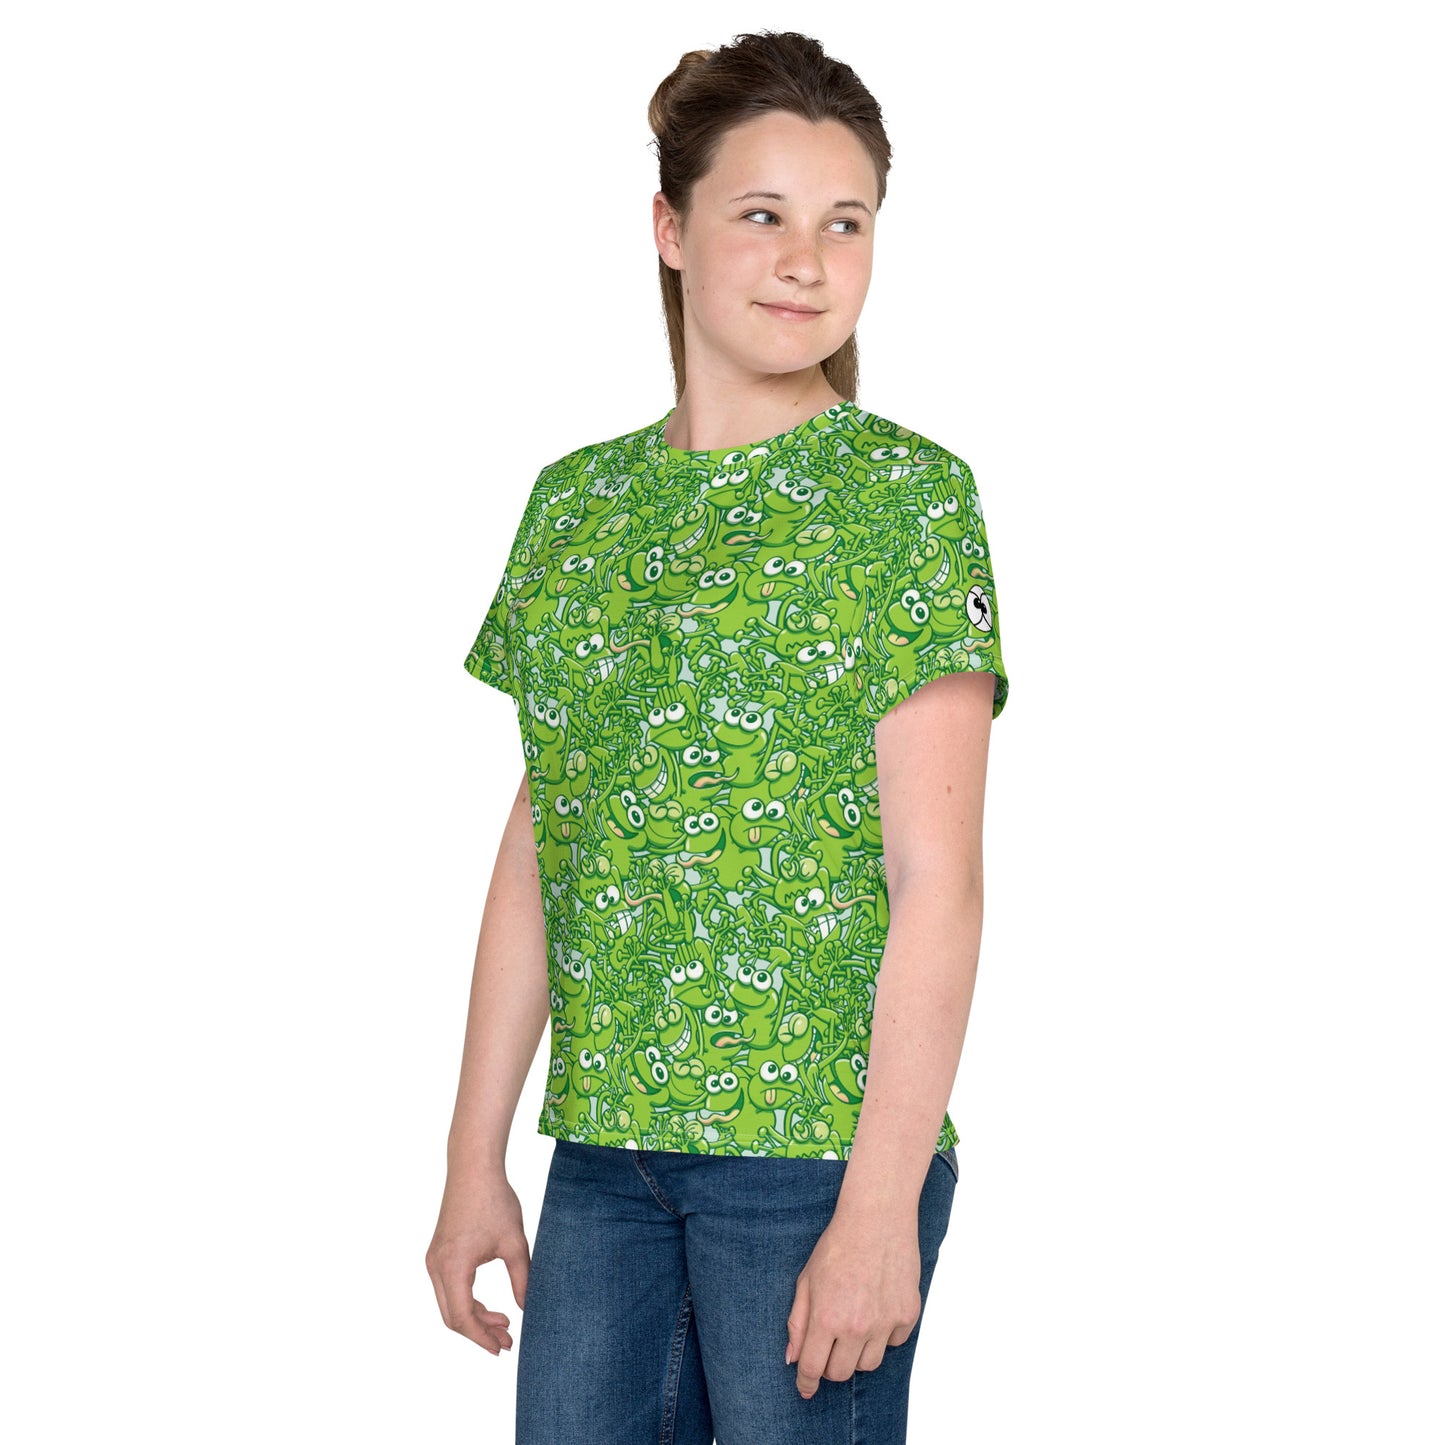 A tangled army of happy green frogs appears when the rain stops Youth crew neck t-shirt. Beautiful girl wearing All over print T-Shirt by Zoo&co